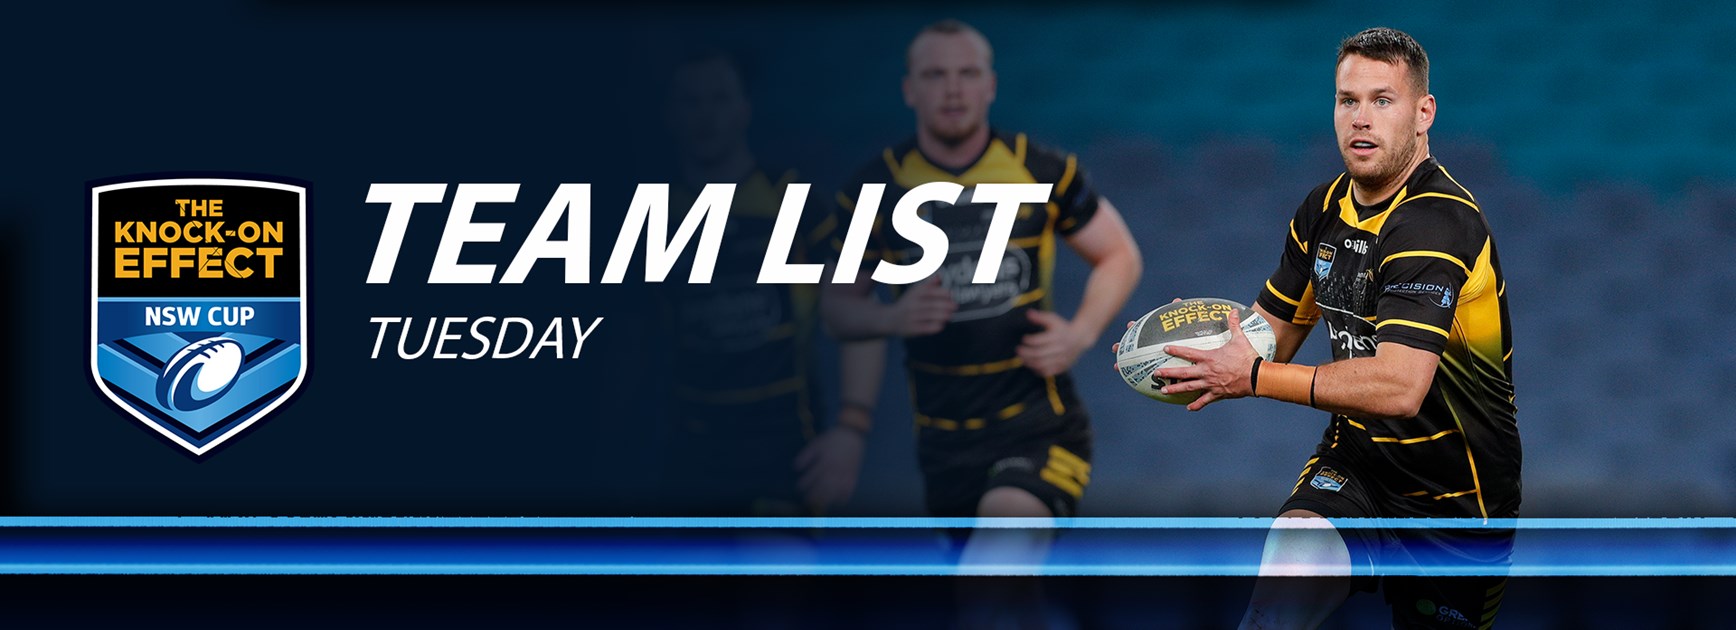 Team List Tuesday | The Knock-On Effect NSW Cup Round 20